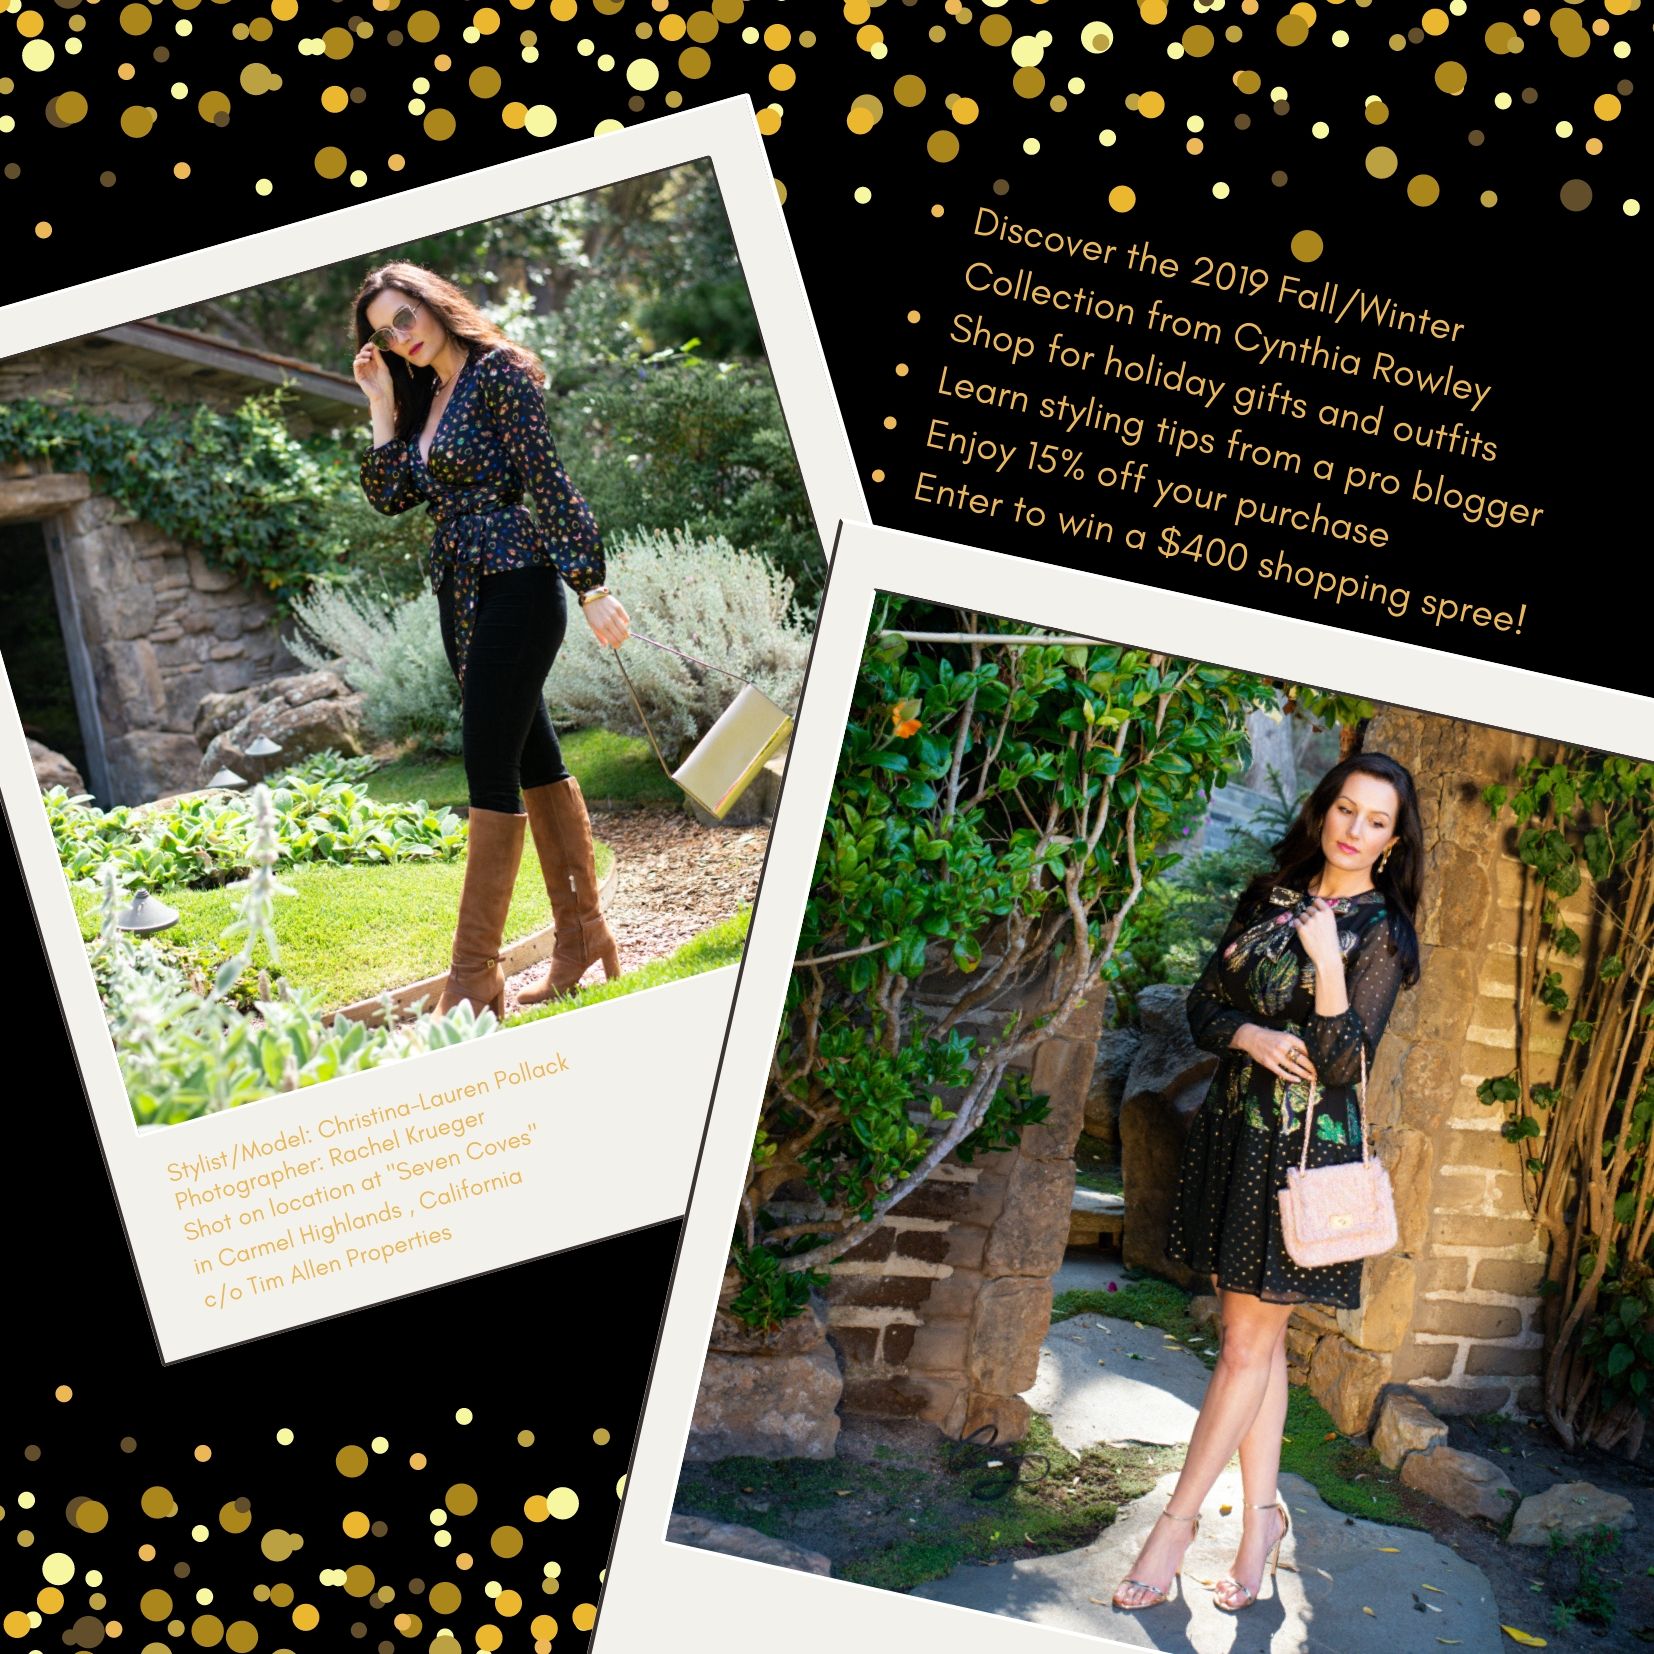 Inspirations & Celebrations x Cynthia Rowley Holiday Party in Carmel-by-the-Sea California